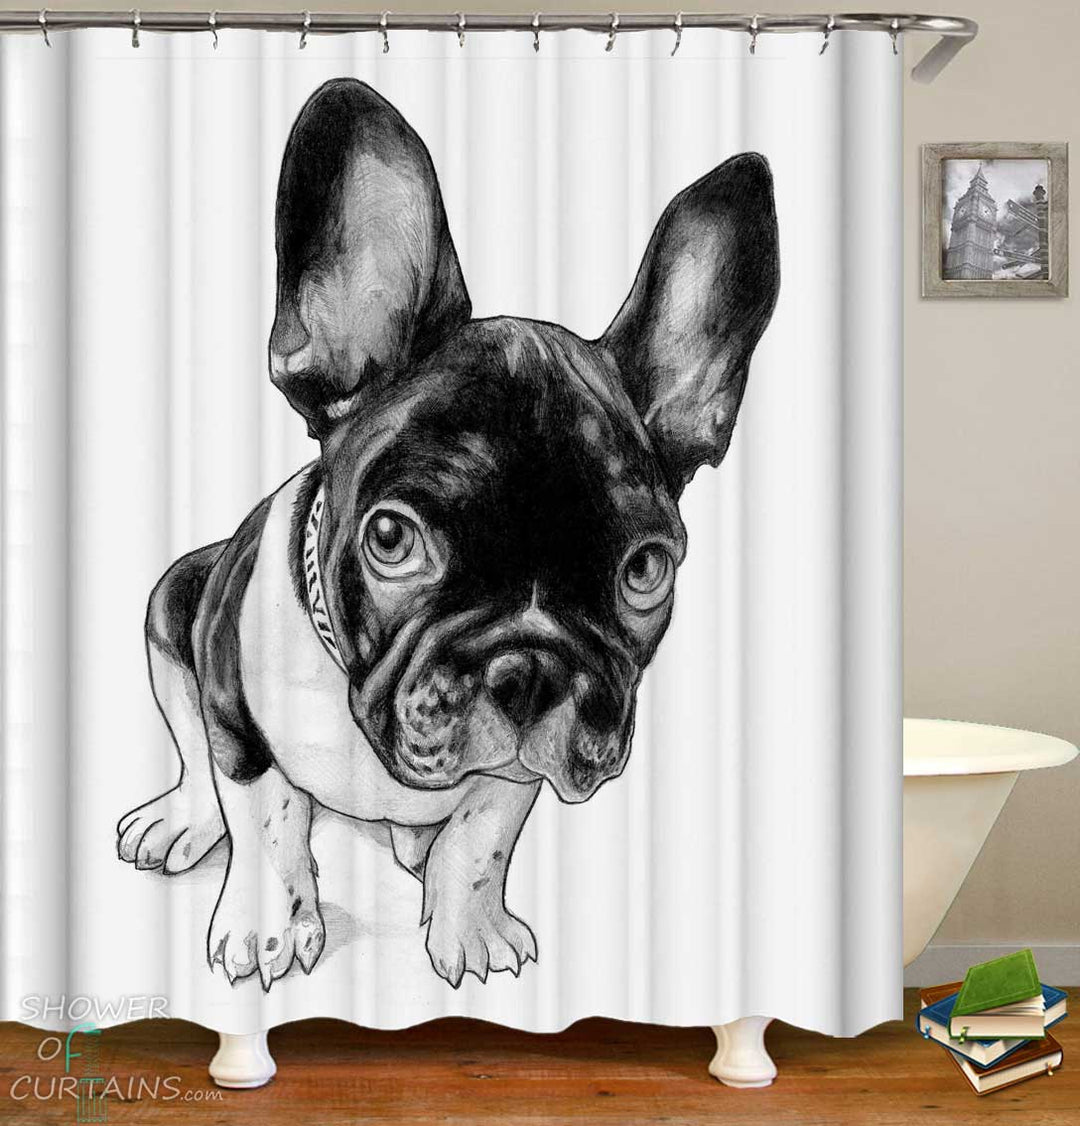 Shower Curtains with Black and White French Bulldog Dog